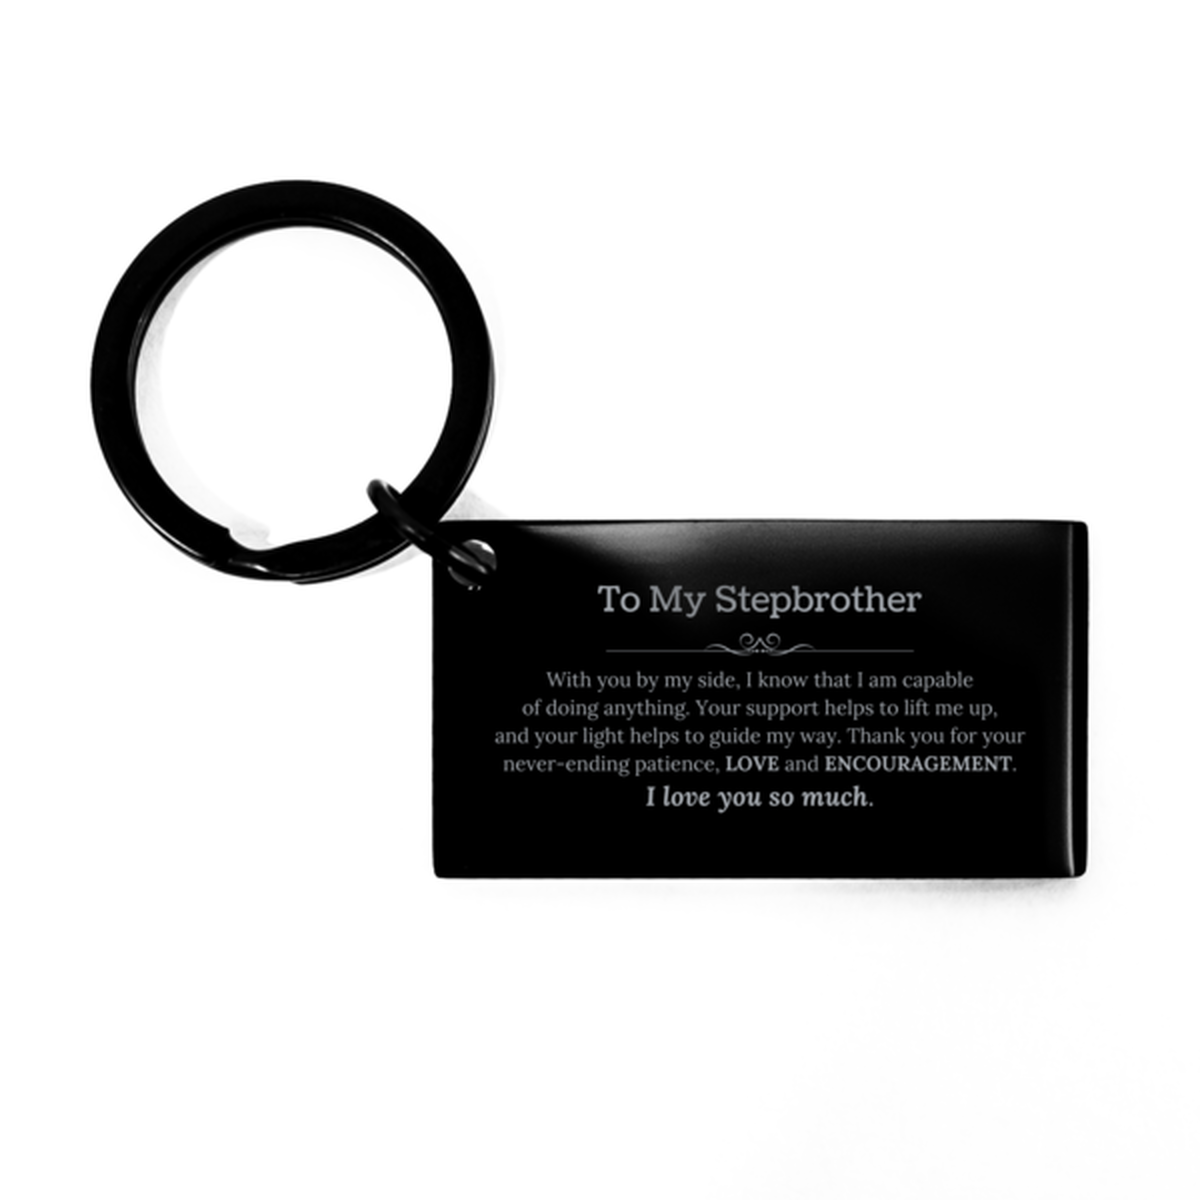 Appreciation Stepbrother Keychain Gifts, To My Stepbrother Birthday Christmas Wedding Keepsake Gifts for Stepbrother With you by my side, I know that I am capable of doing anything. I love you so much